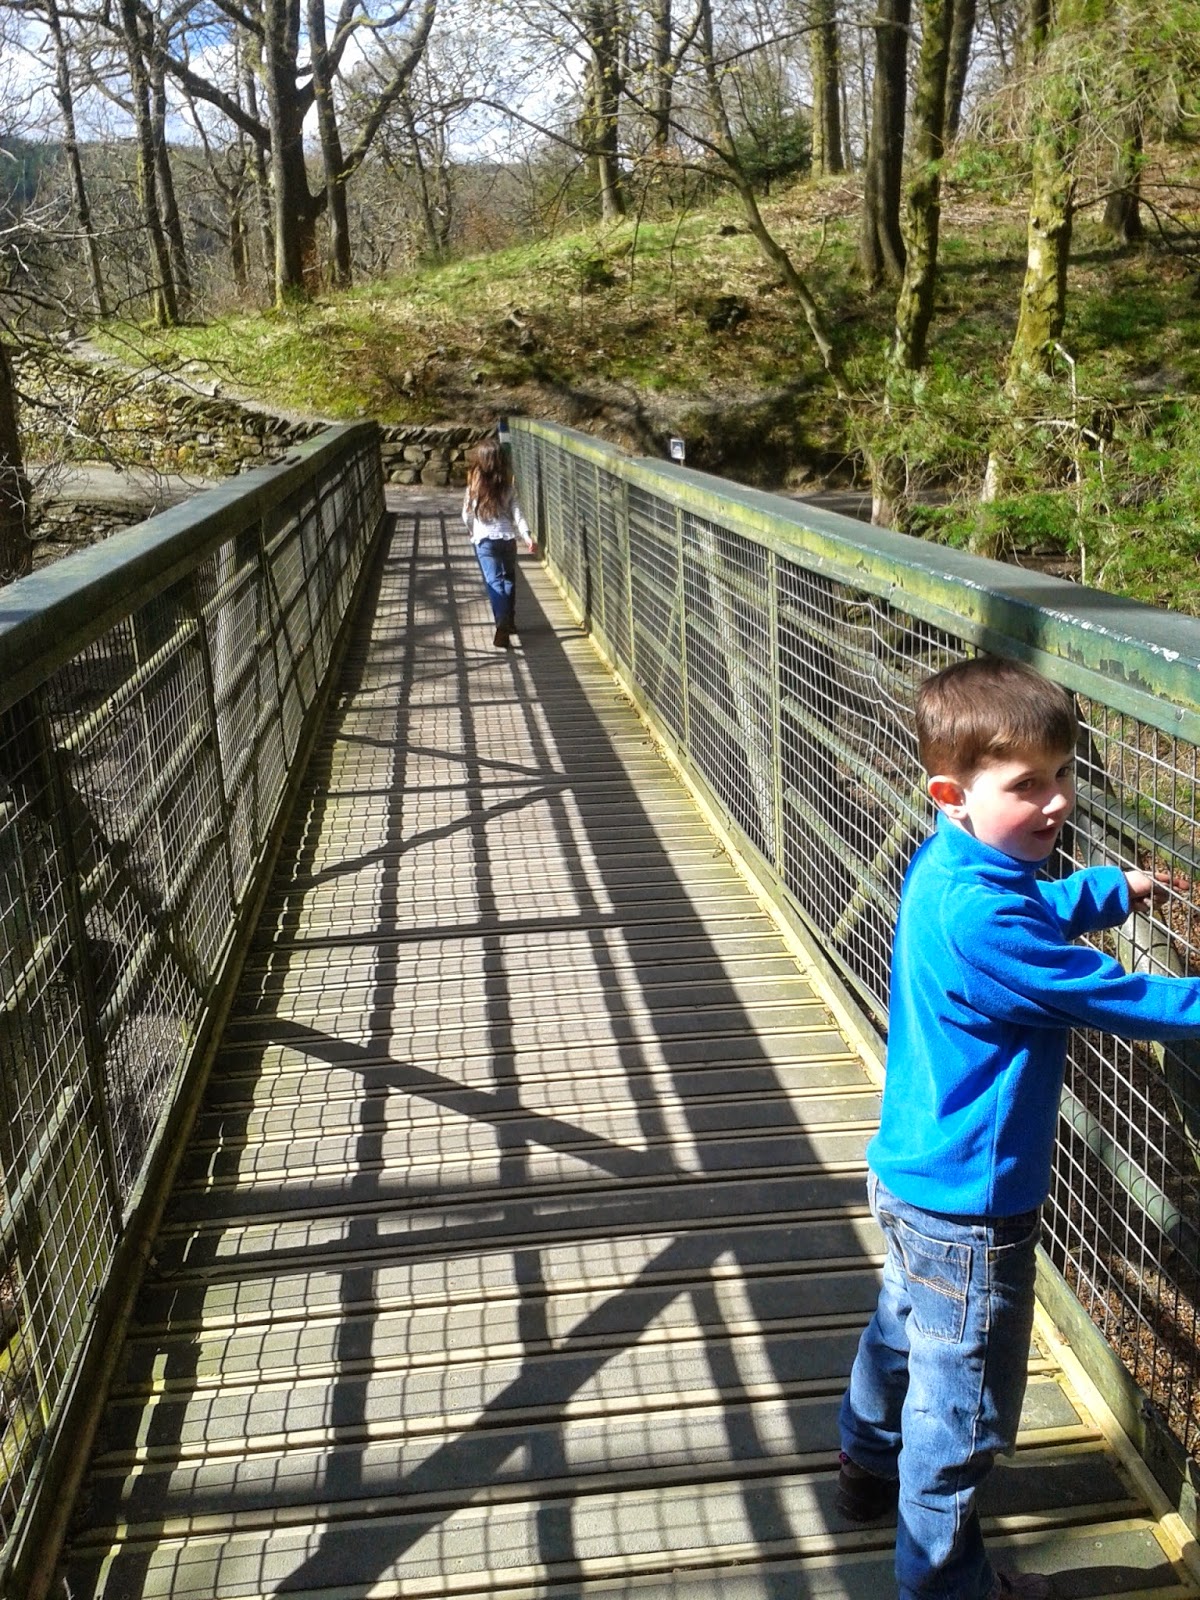 Grizedale Forest Gruffalo trail, nope not on the bridge. 